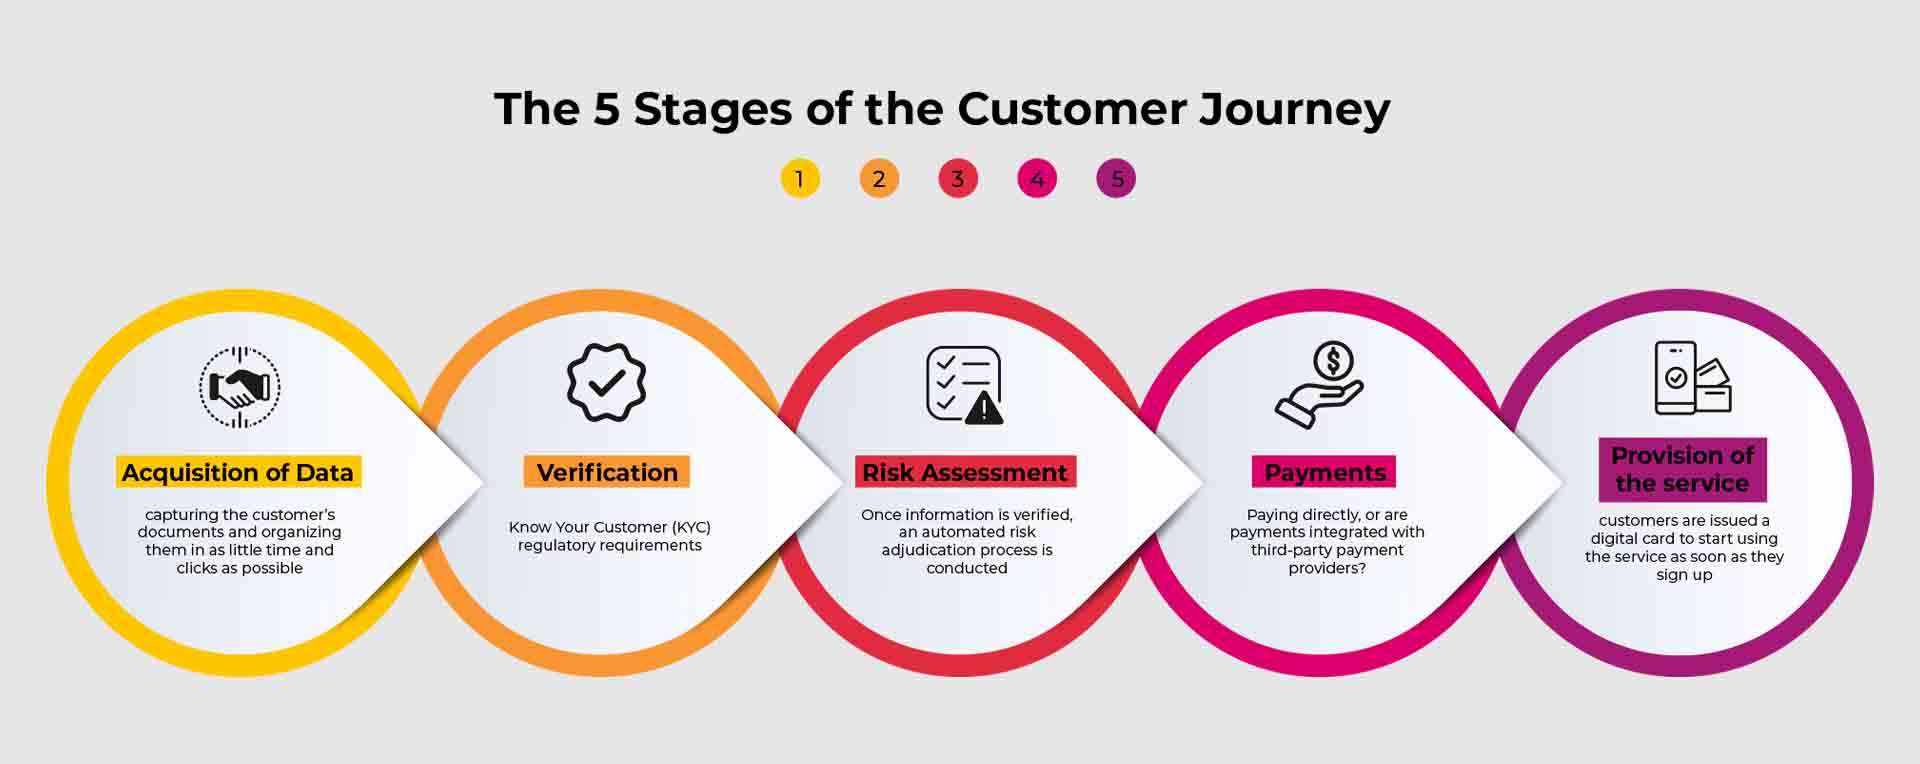 Digital Onboarding - The 5 Stages of the Customer Journey